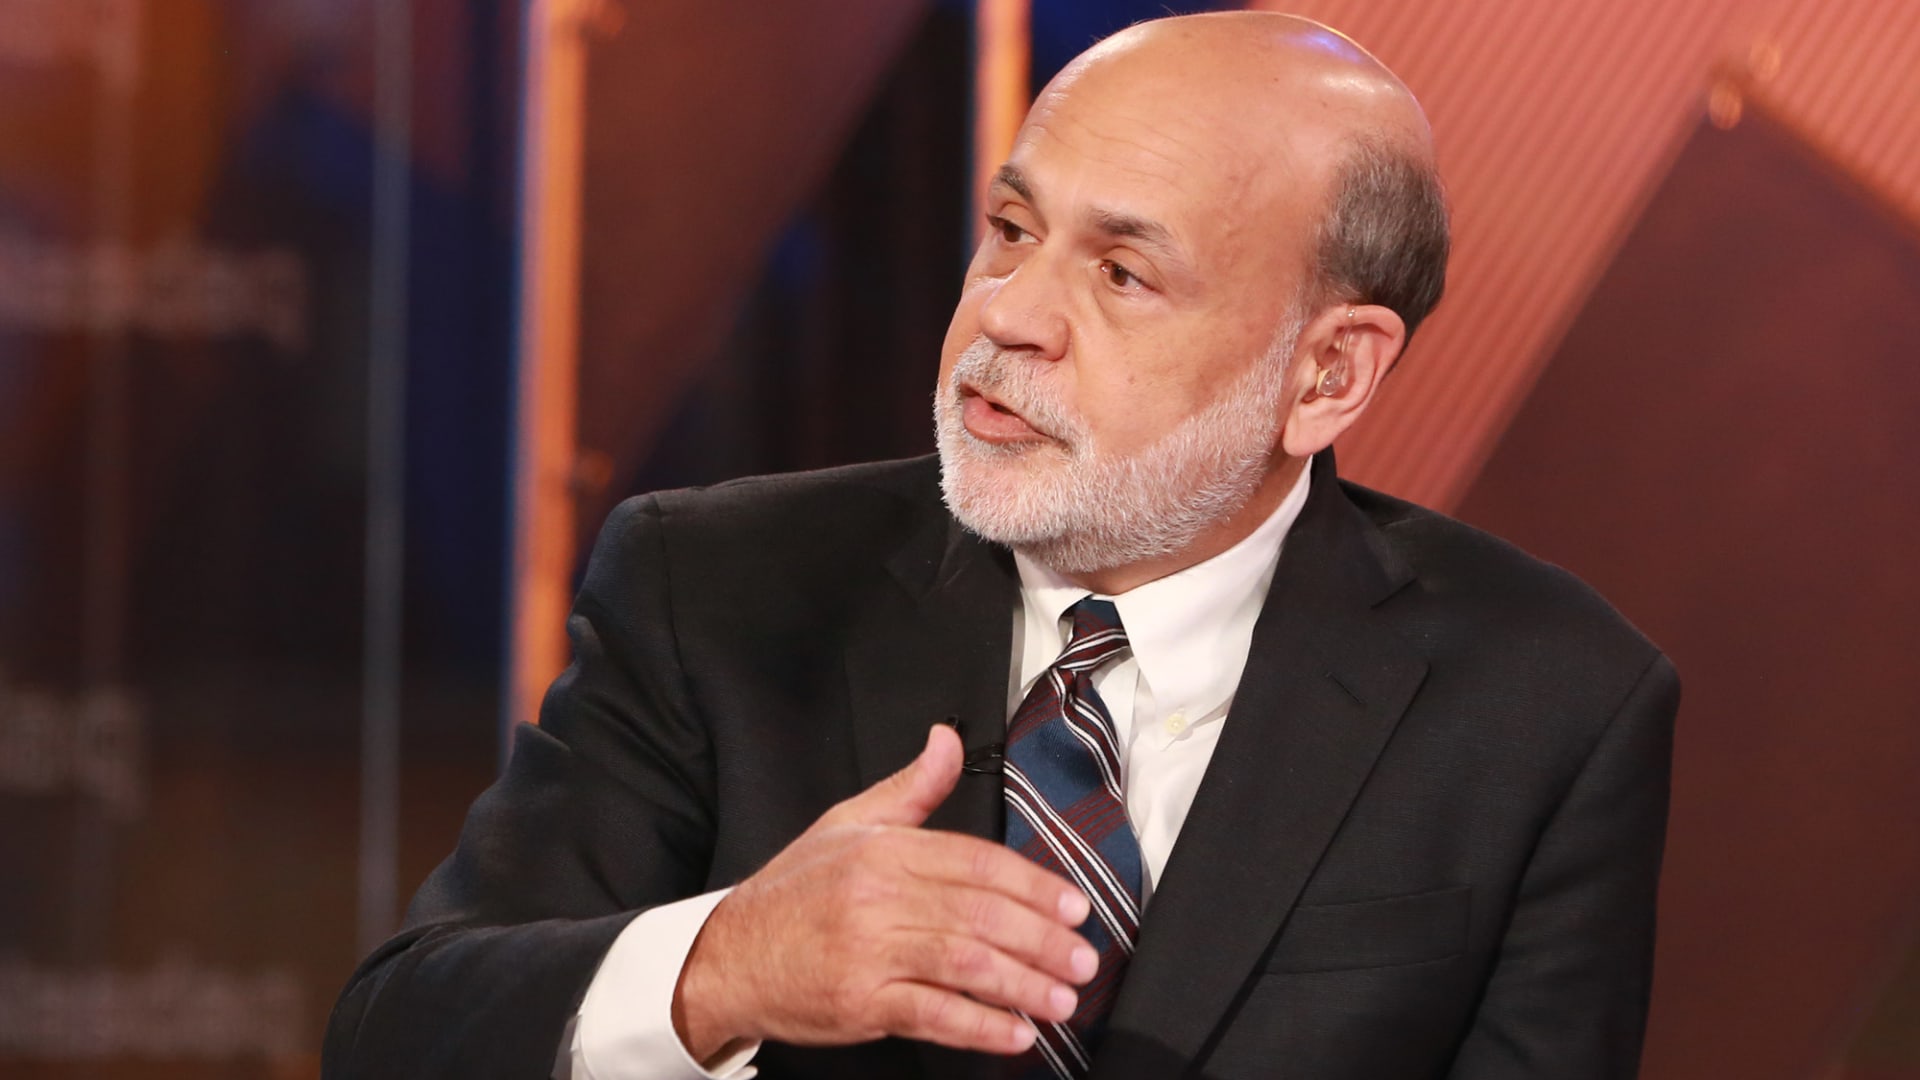 Bernanke says the Fed’s slow response to inflation ‘was a mistake’